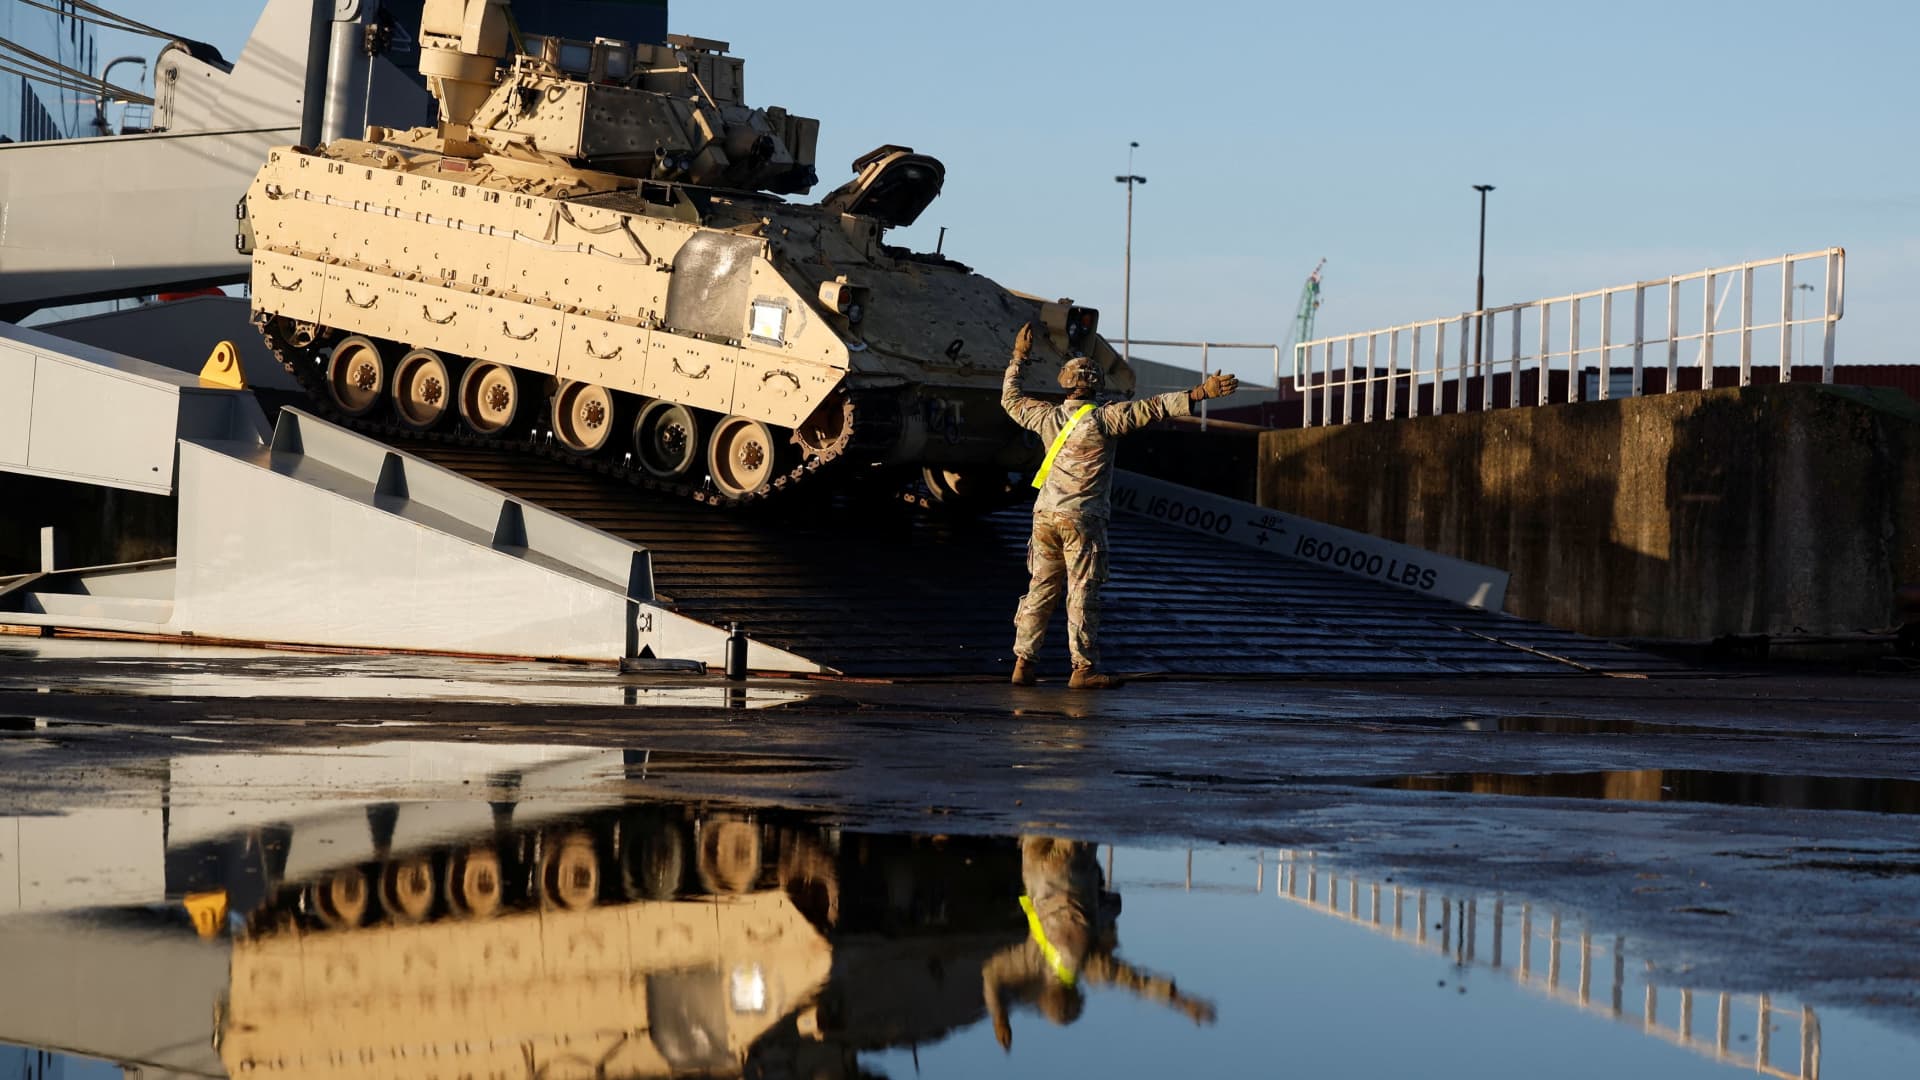 U.S. army vehicles including tanks are brought ashore in the Netherlands as a military unit is transported to Poland and Lithuania as part of a NATO mission to reinforce the alliance's eastern flank after the Russian invasion of Ukraine, in Vlissingen, Netherlands January 11, 2023.